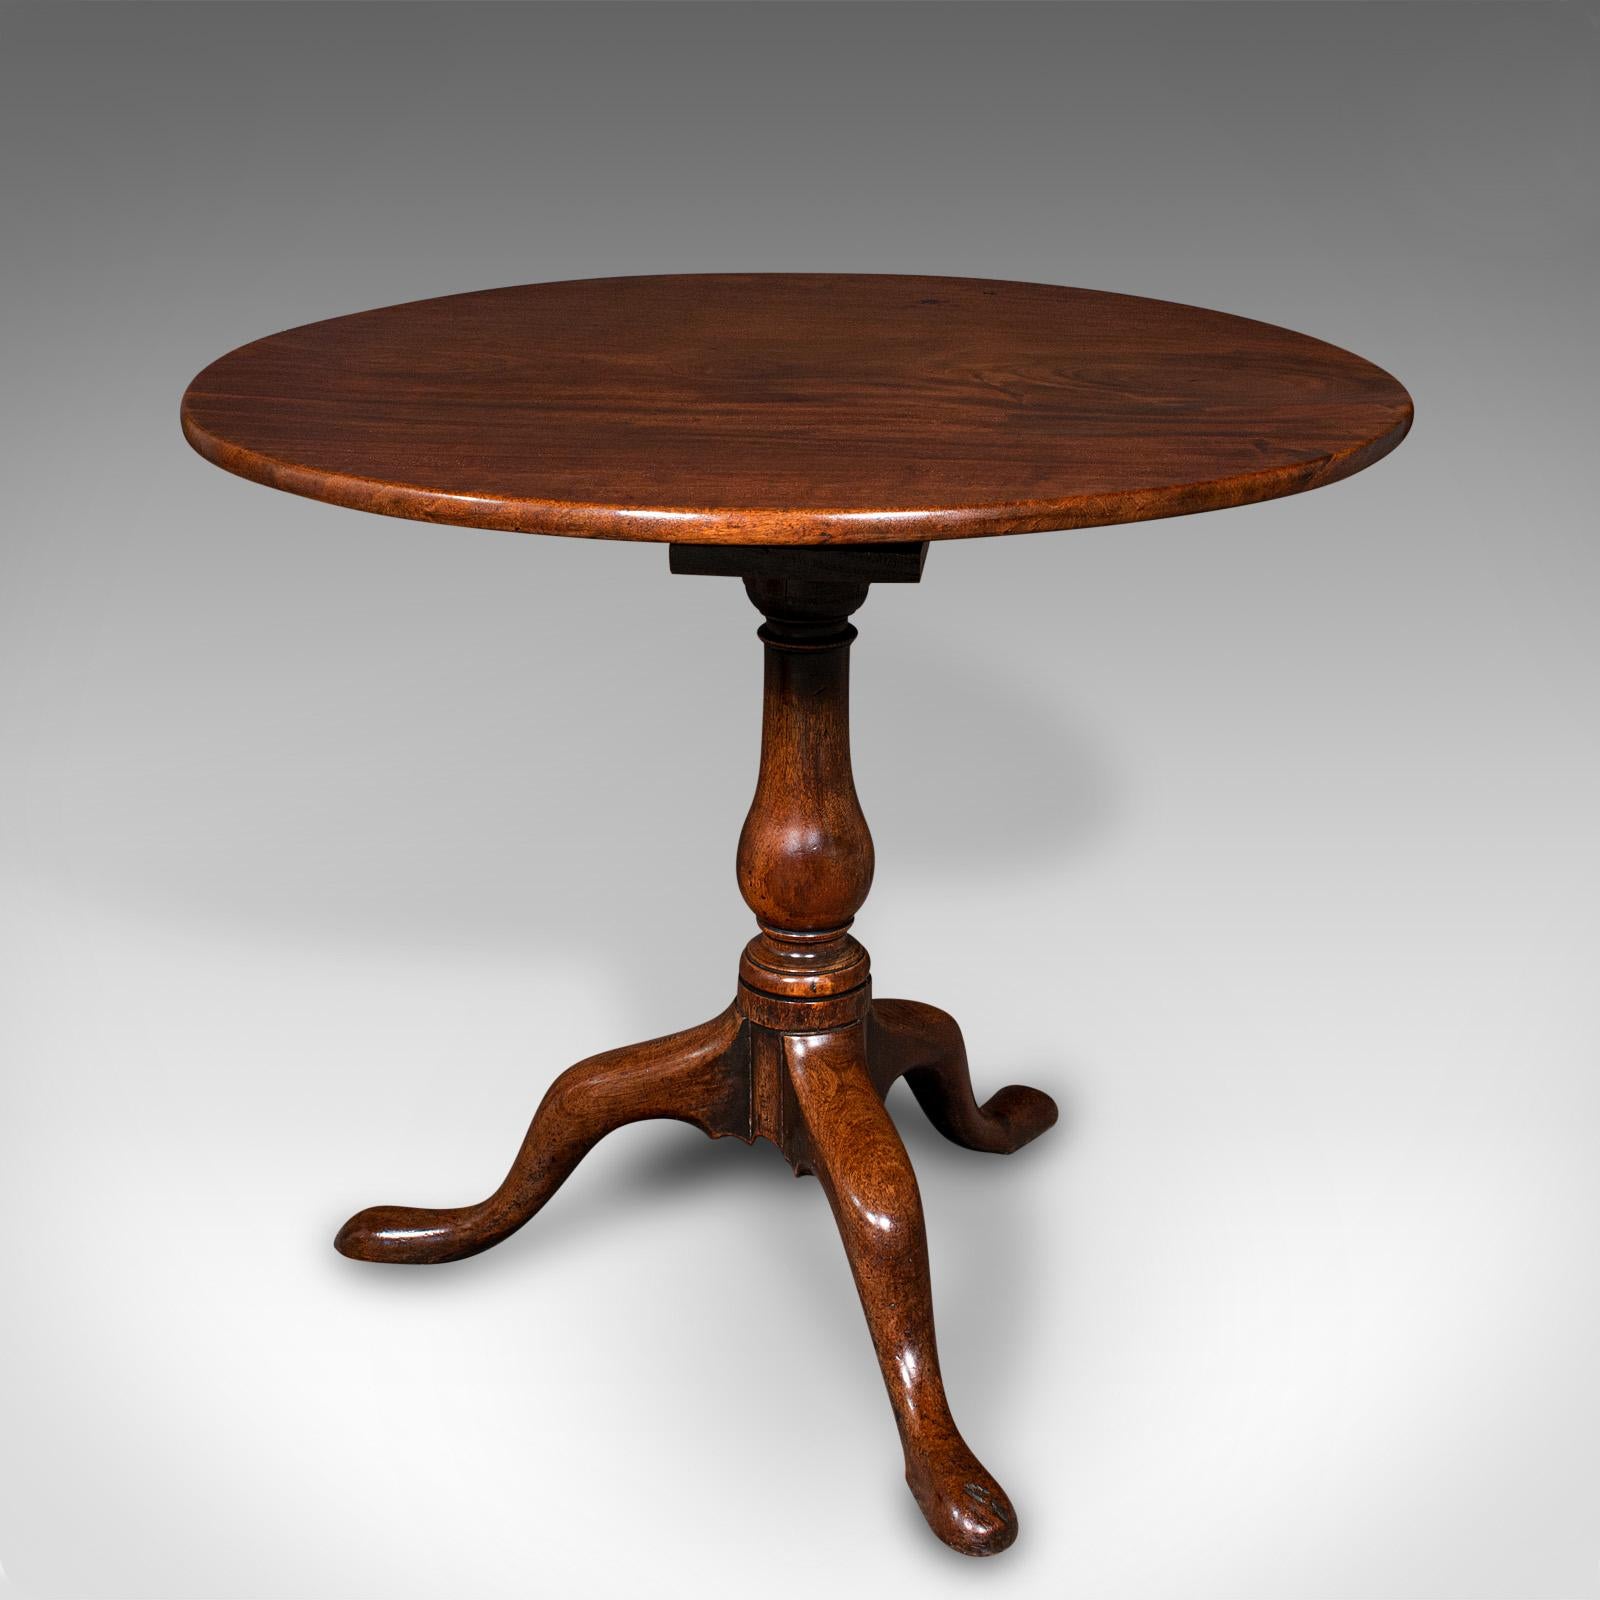 Antique Tilt Top Table, English, Mahogany, Side, Lamp, Rotary, Georgian, C.1760 In Good Condition For Sale In Hele, Devon, GB